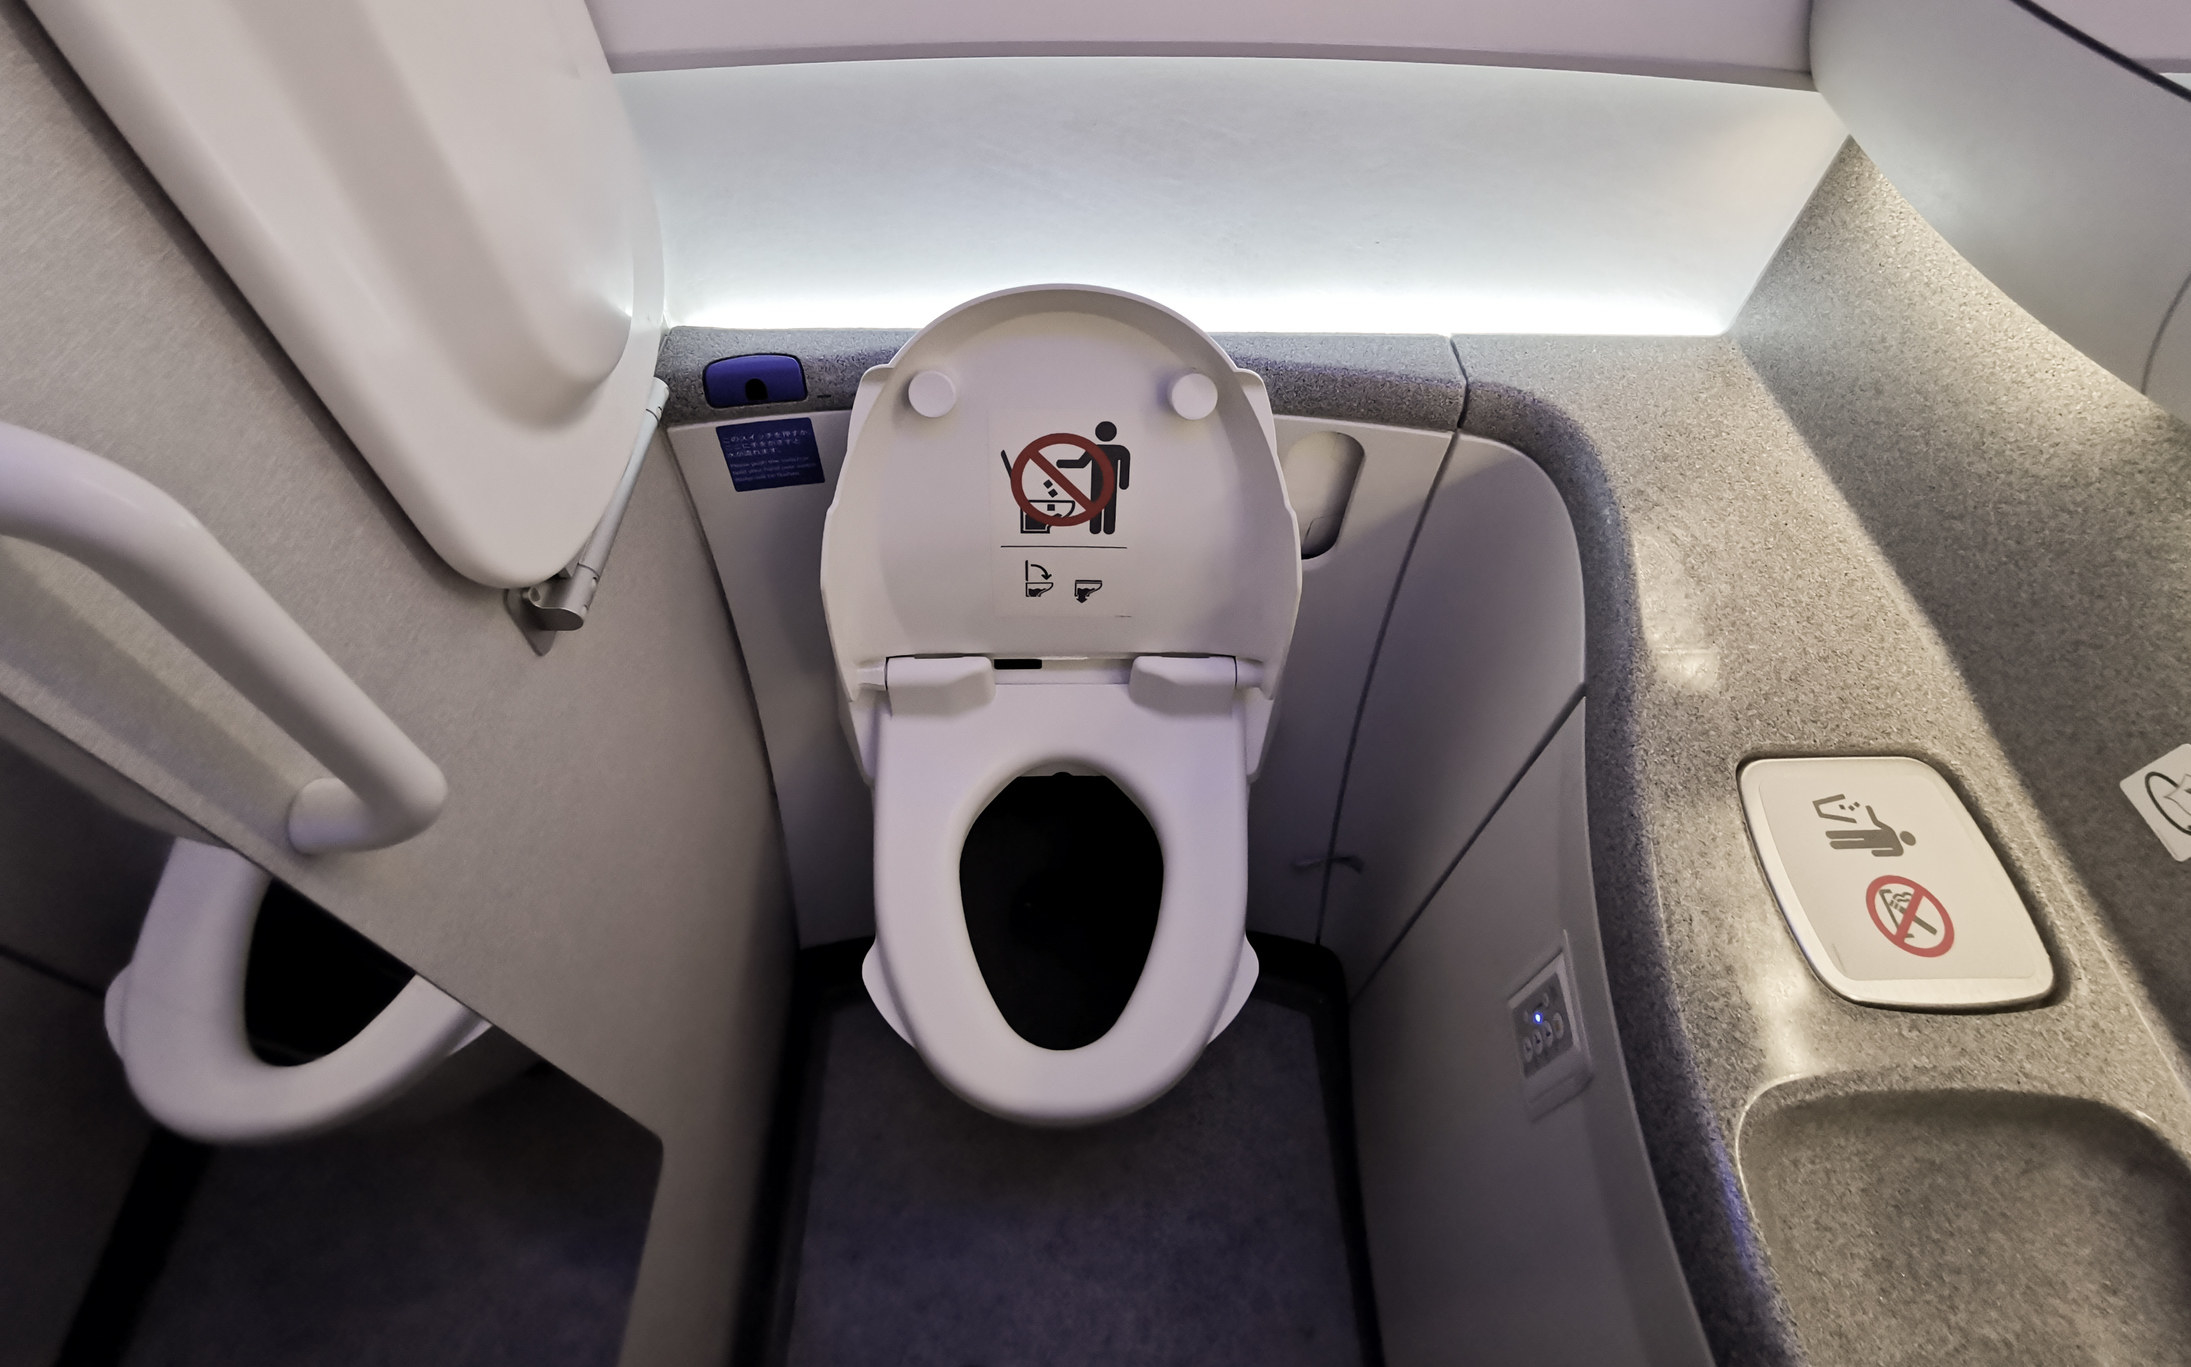 Inside of an airplane lavatory